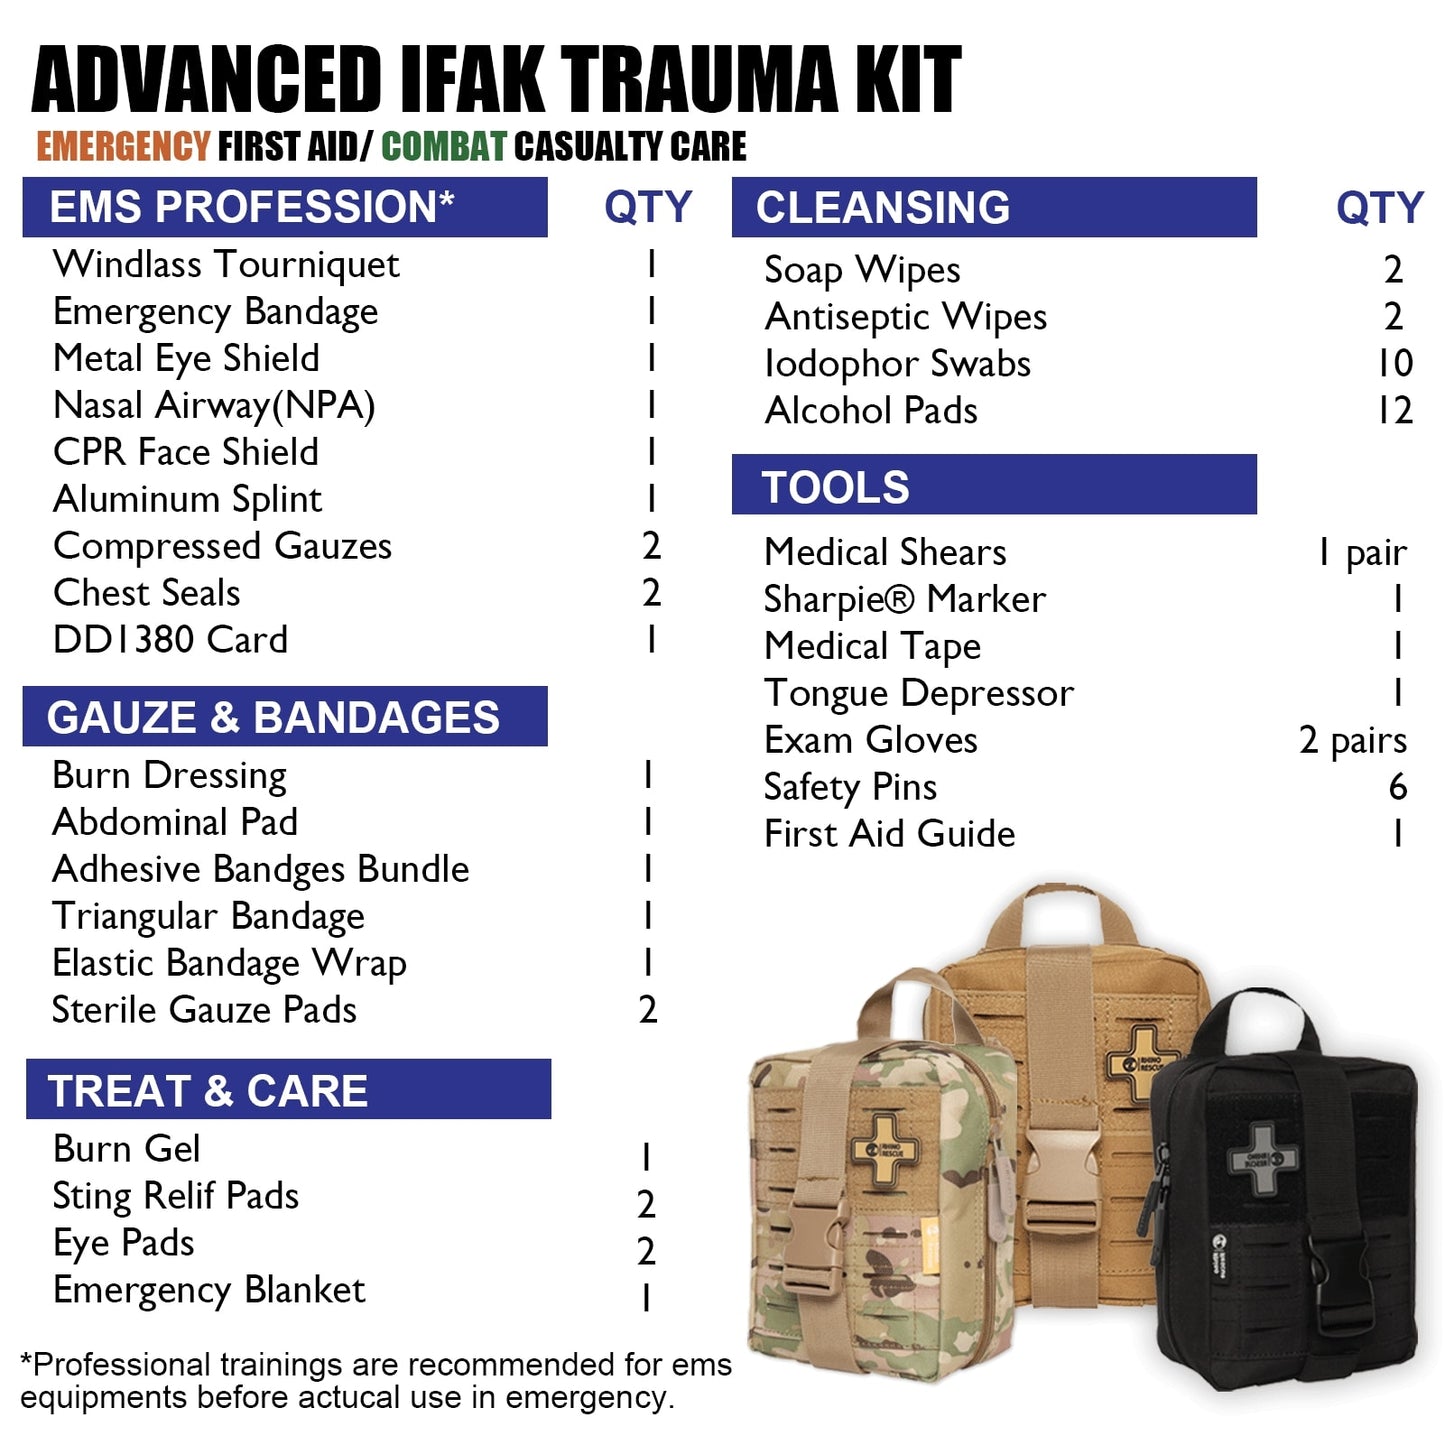 RHINO IFAK Trauma Kit First Aid Medical Pouch Emergency  Survival Gear and Equipment with Molle Car Travel Hiking